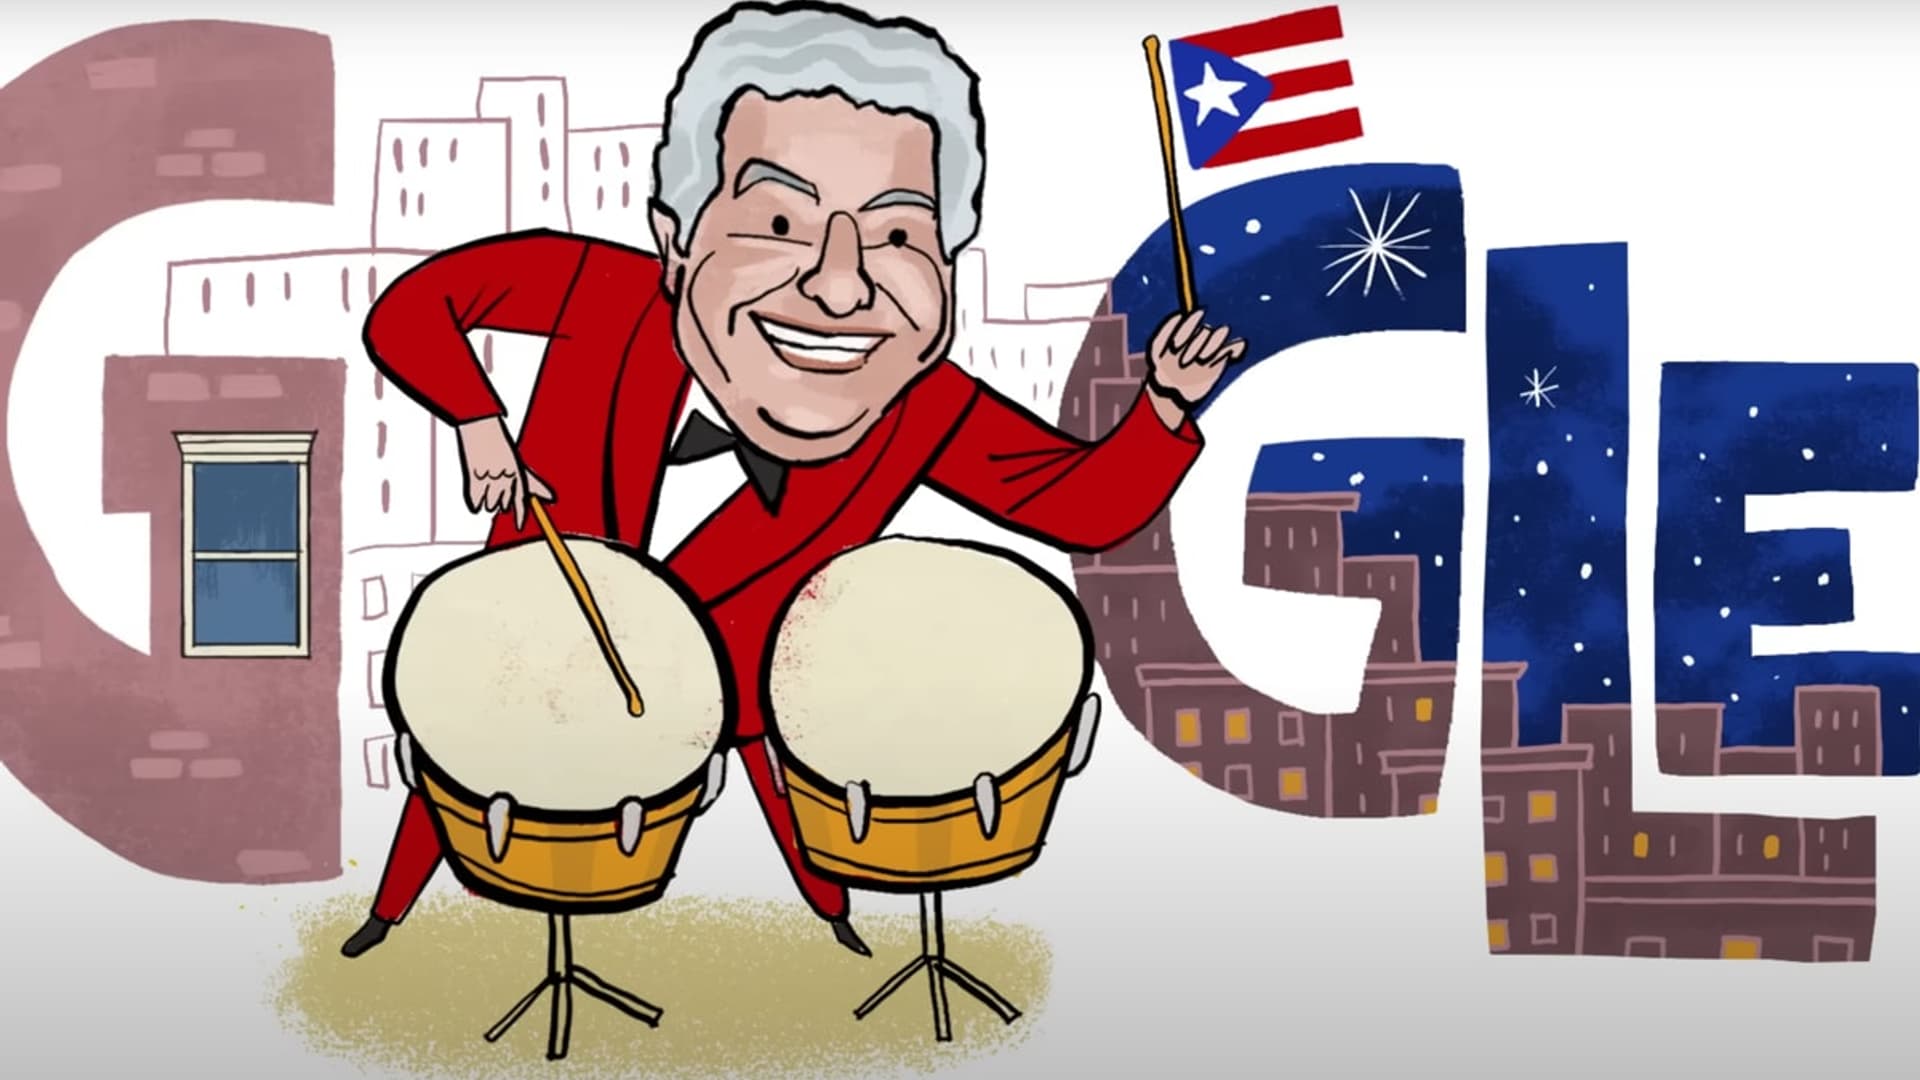 Google honors legendary musician Tito Puente with animated Doodle